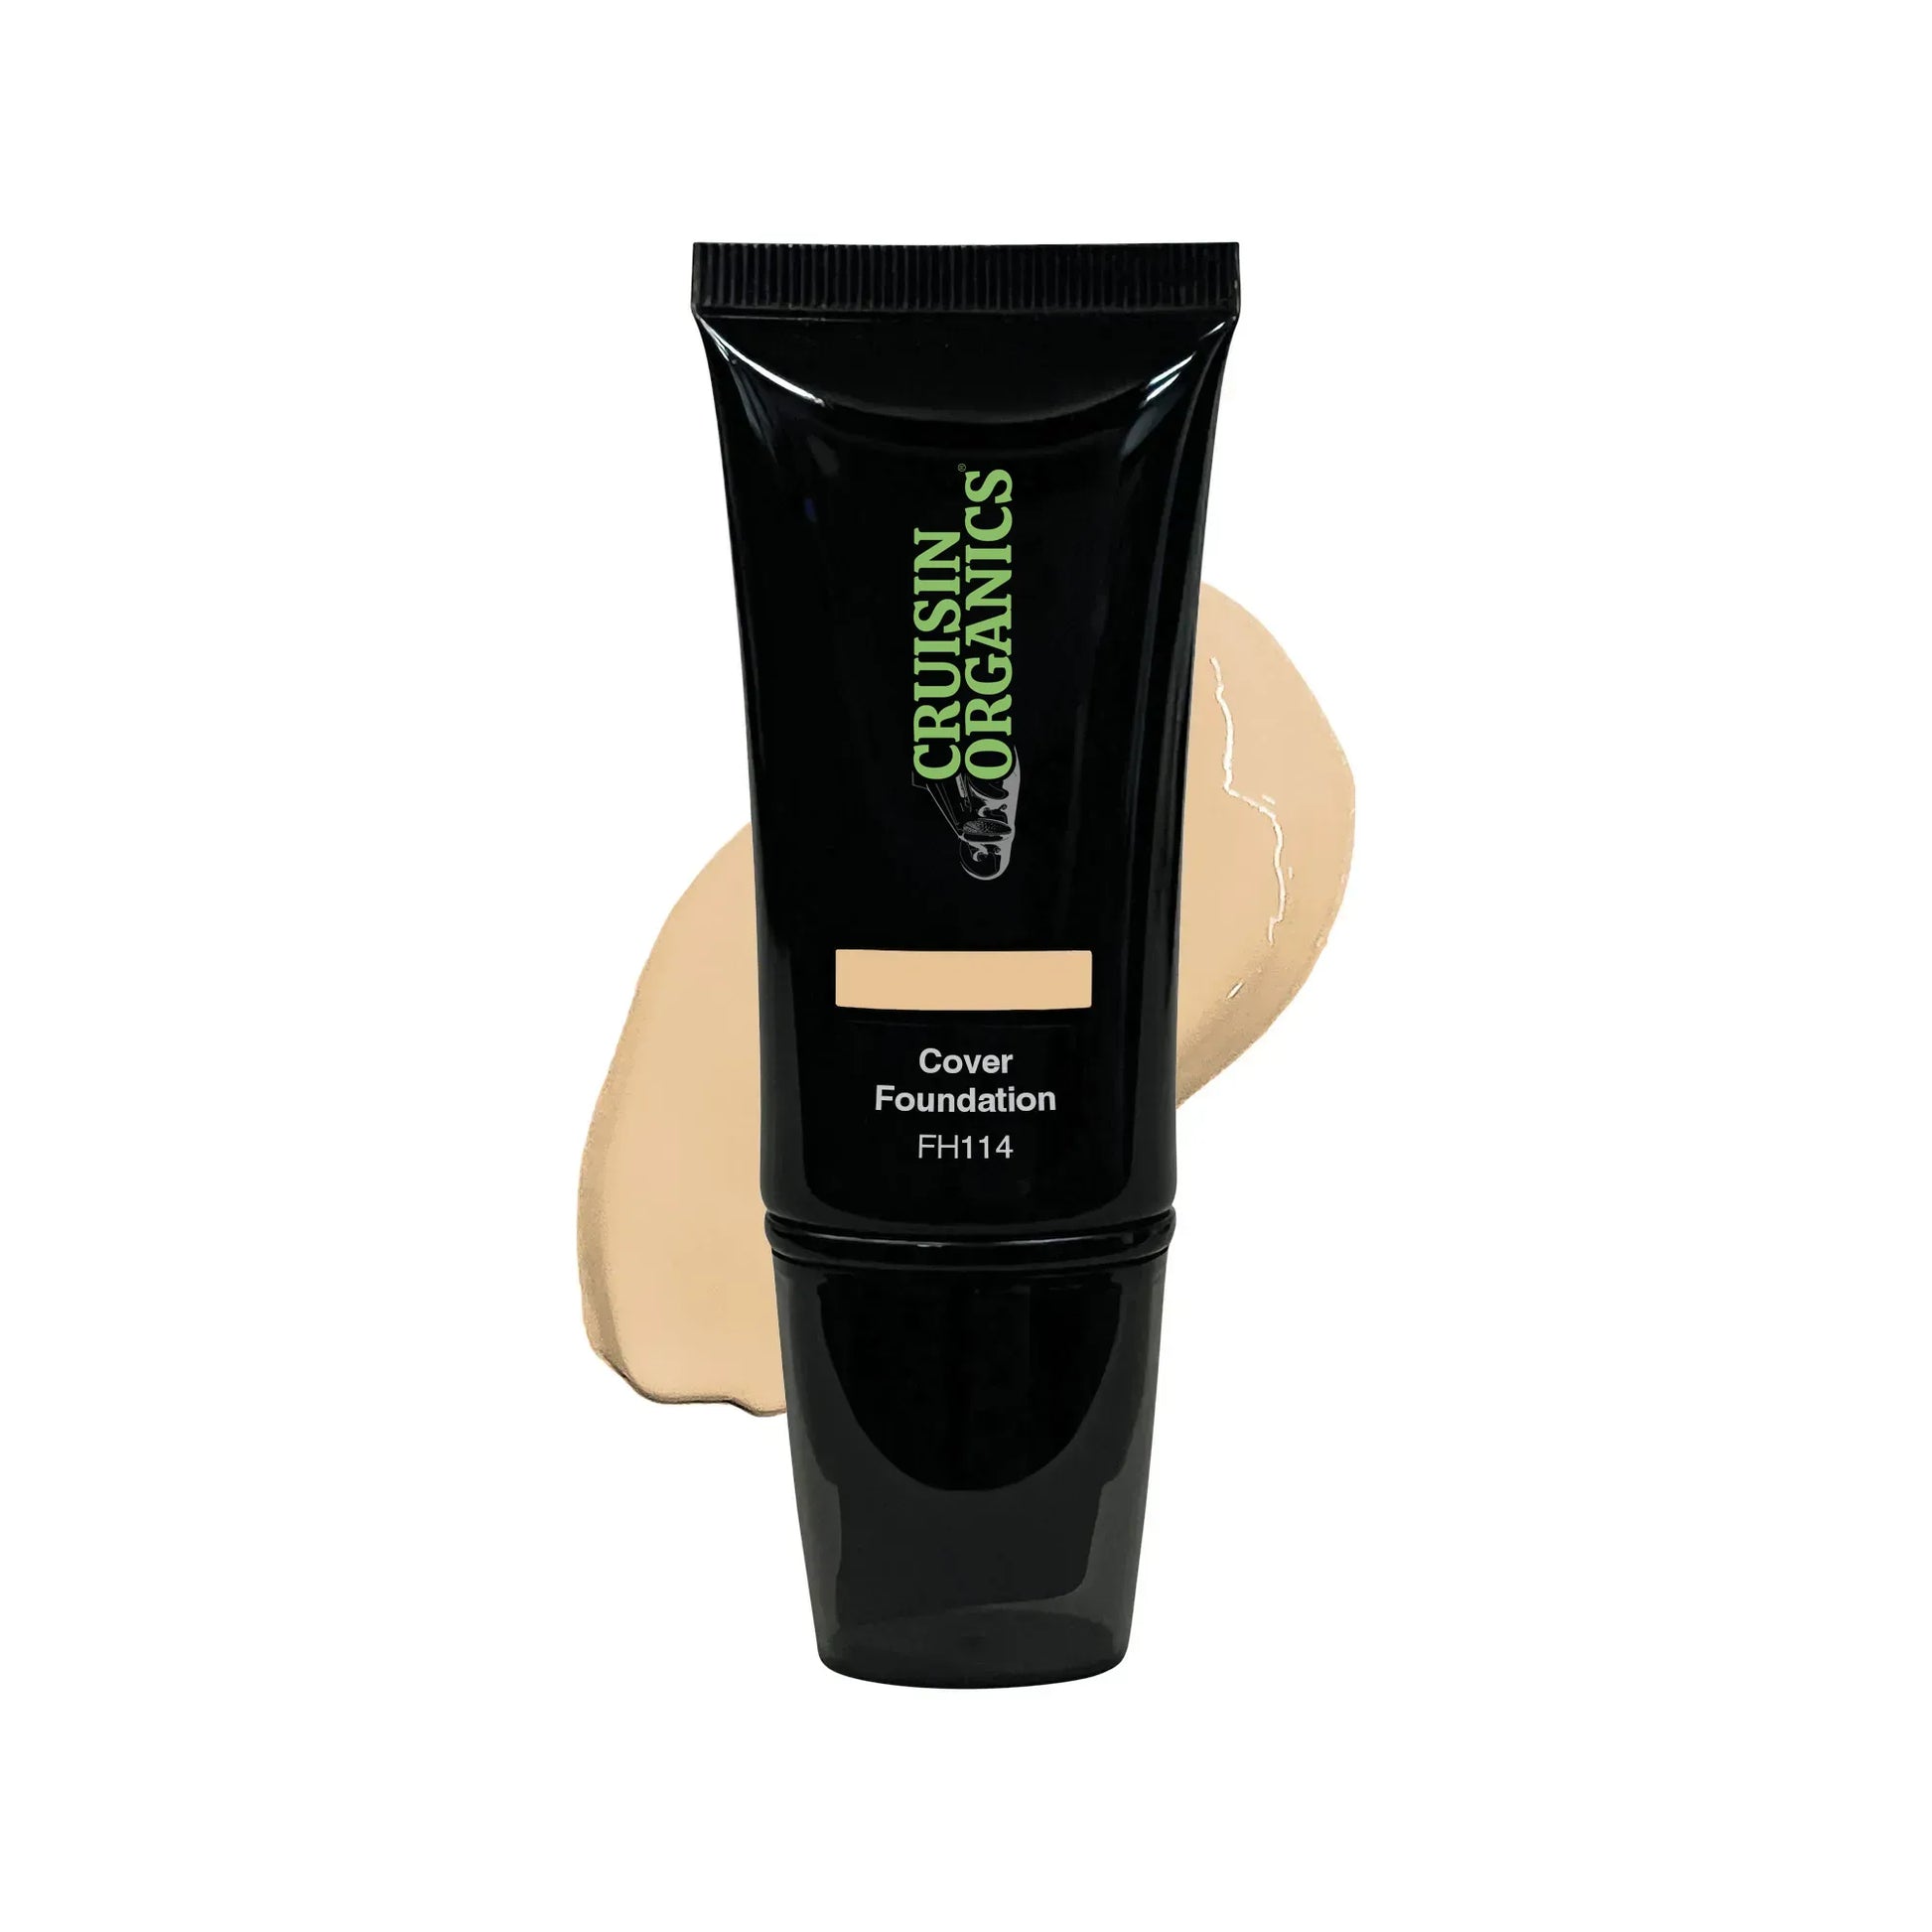 Honey Foundation by Cruisin Organics. Fully Covers. Evens and smooths skin pigments.